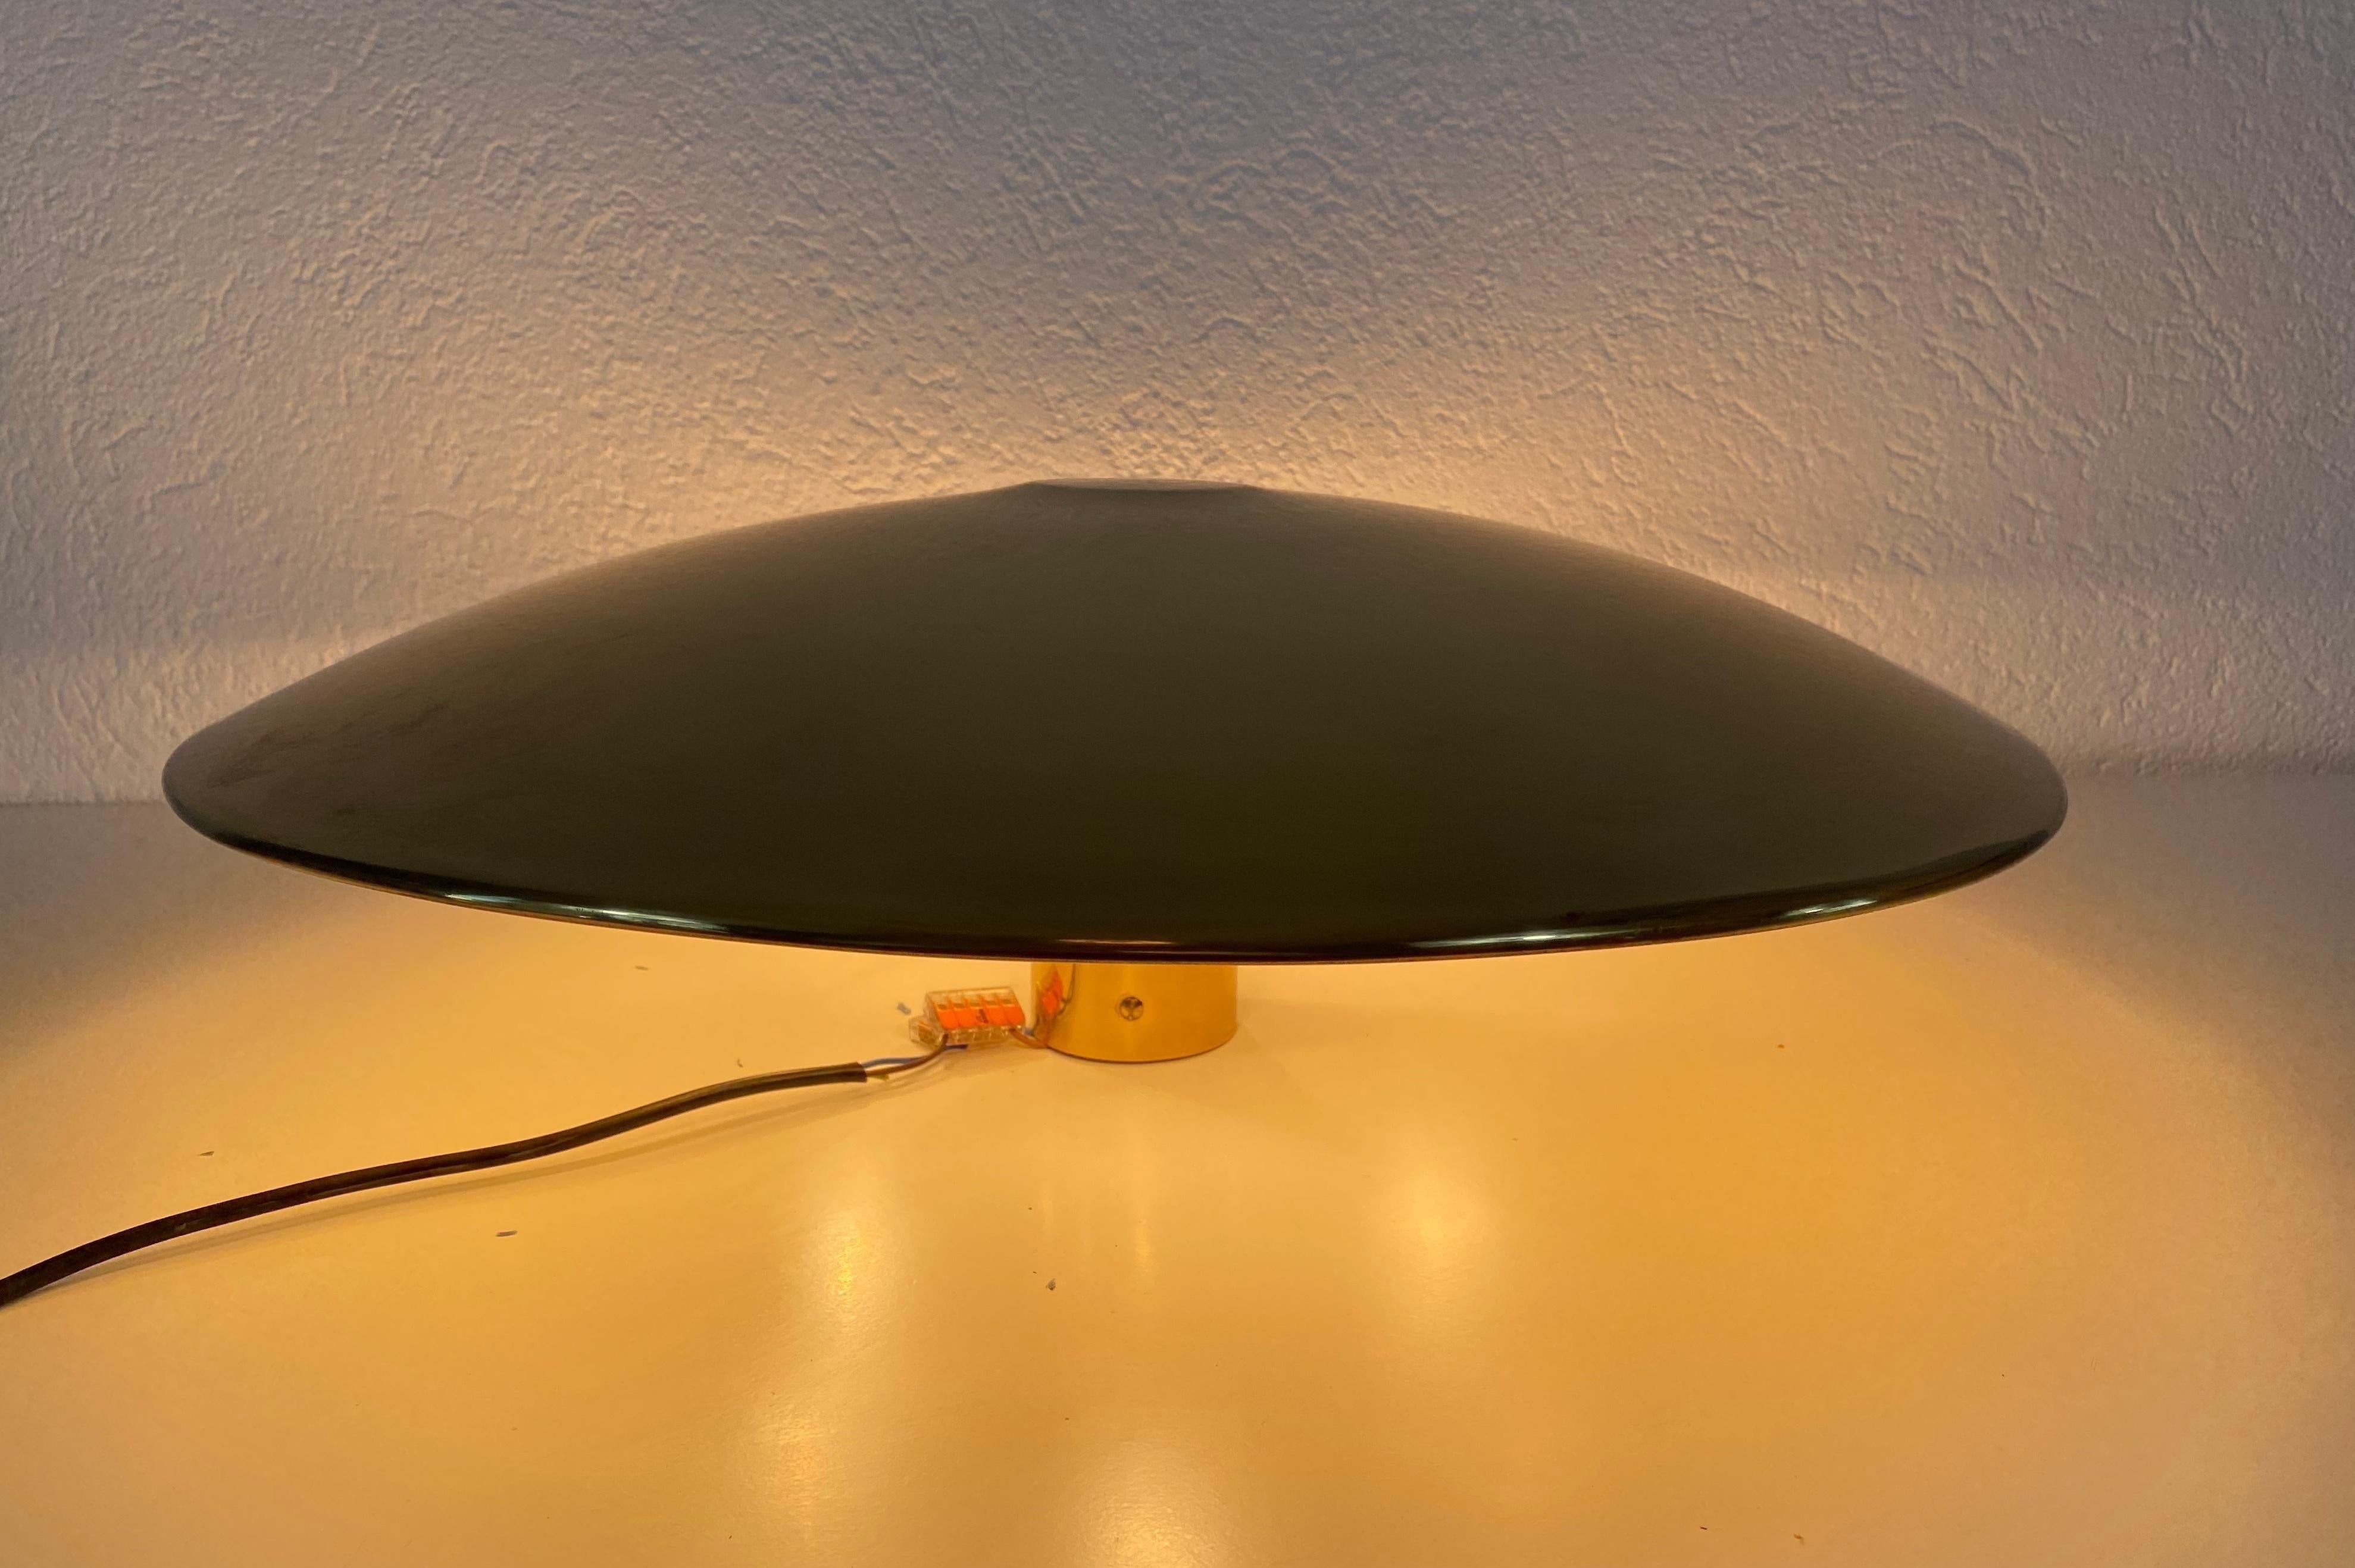 A midcentury flush mount by Florian Schulz made in Germany in the 1960s. It is fascinating with its round gilt brass shade. 

Measurements:

Height 20 cm

Diameter 58 cm

The light requires five E27 light bulbs. Good vintage